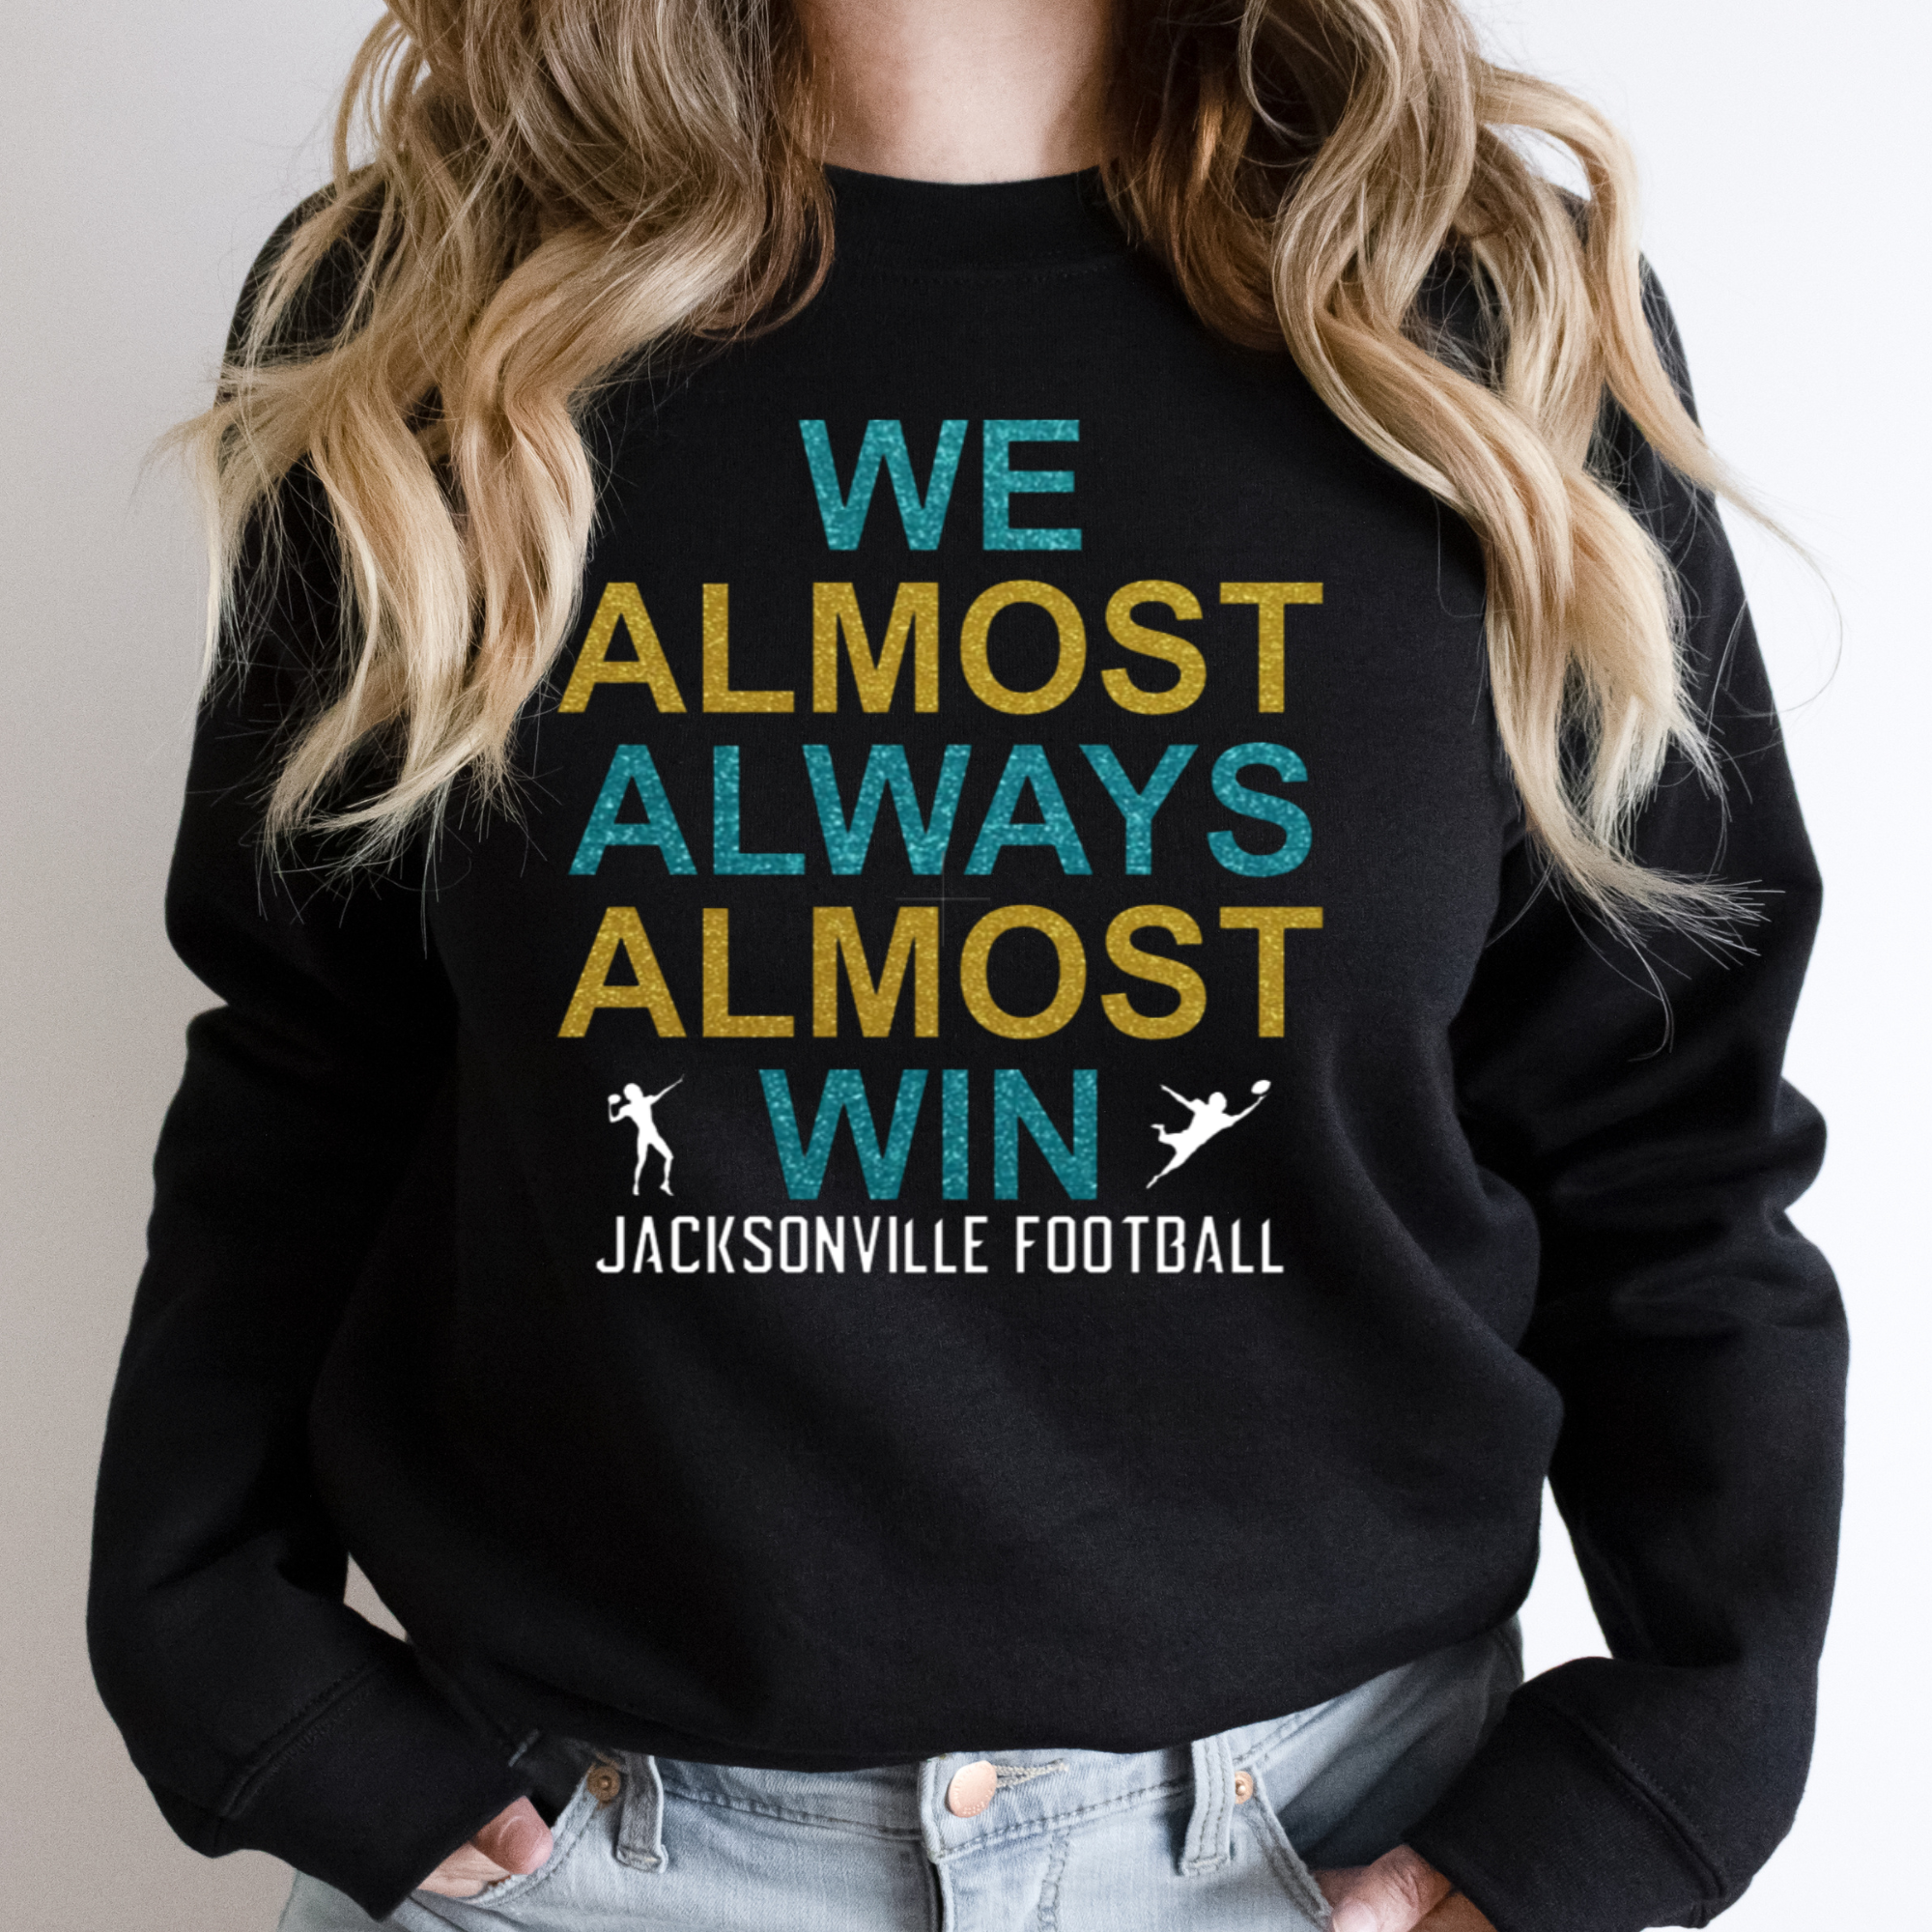 We Almost Always Almost Win Jacksonville Football Glitter Shirt